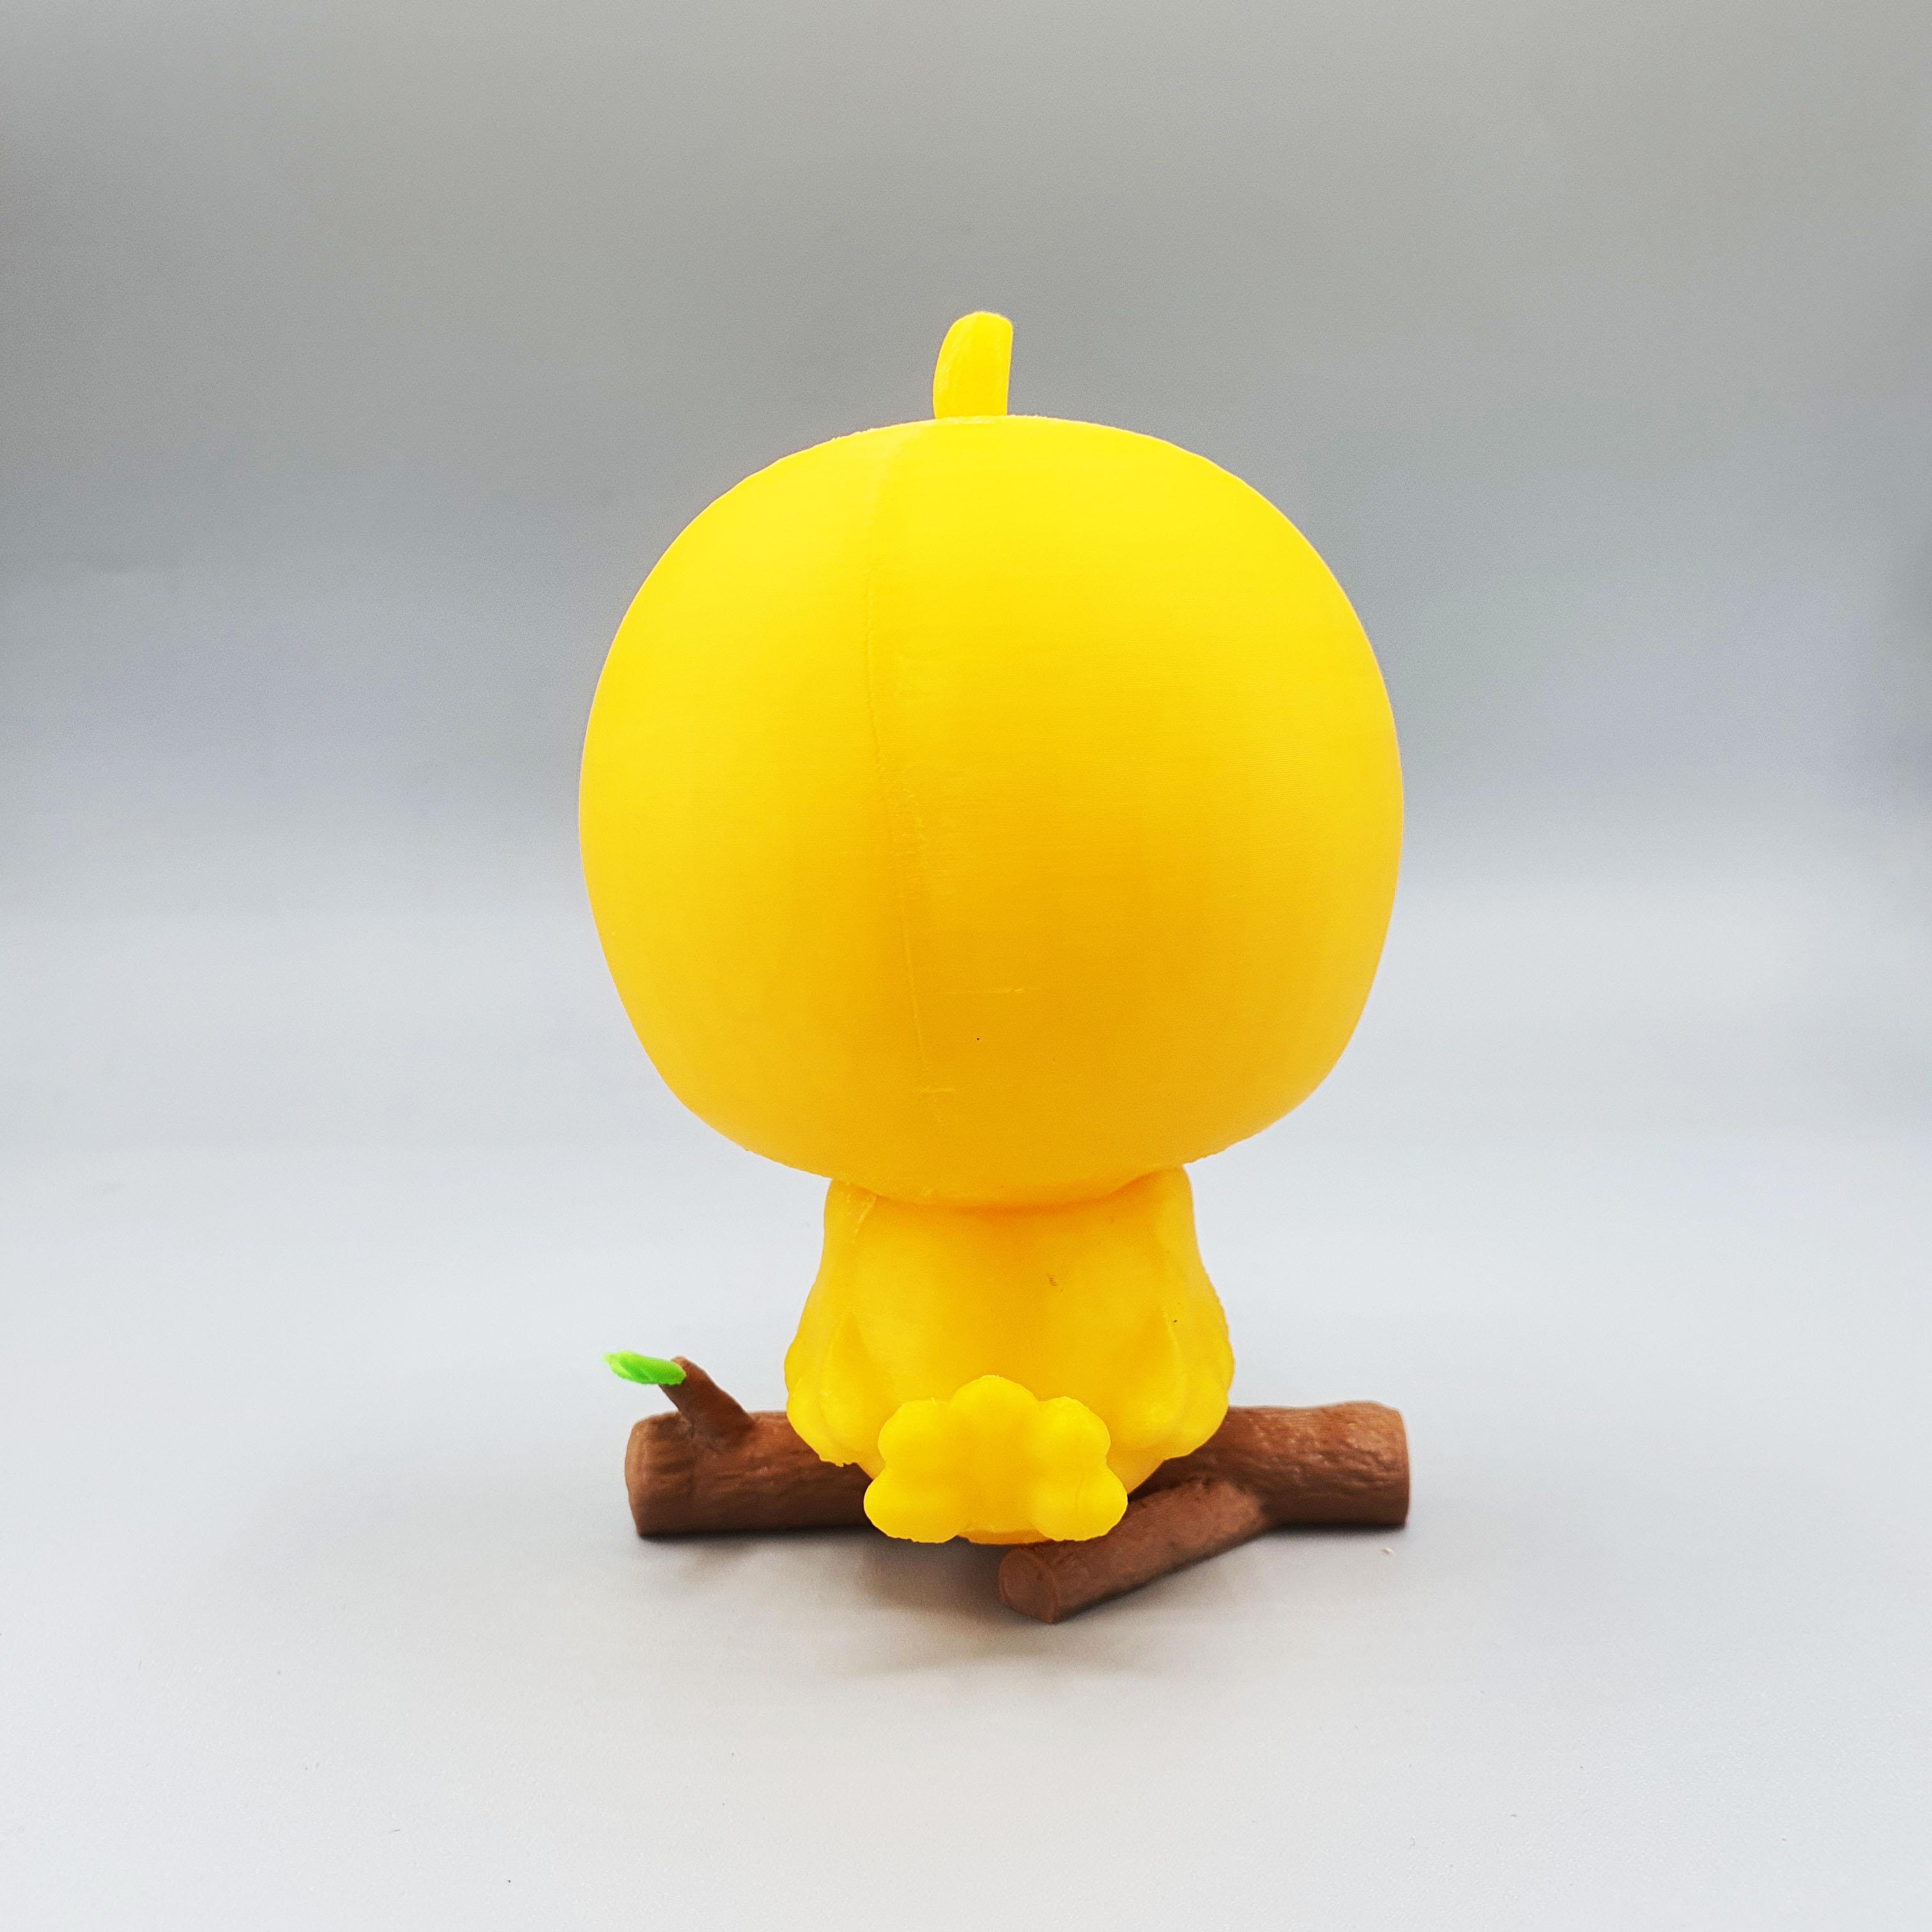 Cute Chibi Bird - Parted Out - Tweety Bird Inspired 3d model